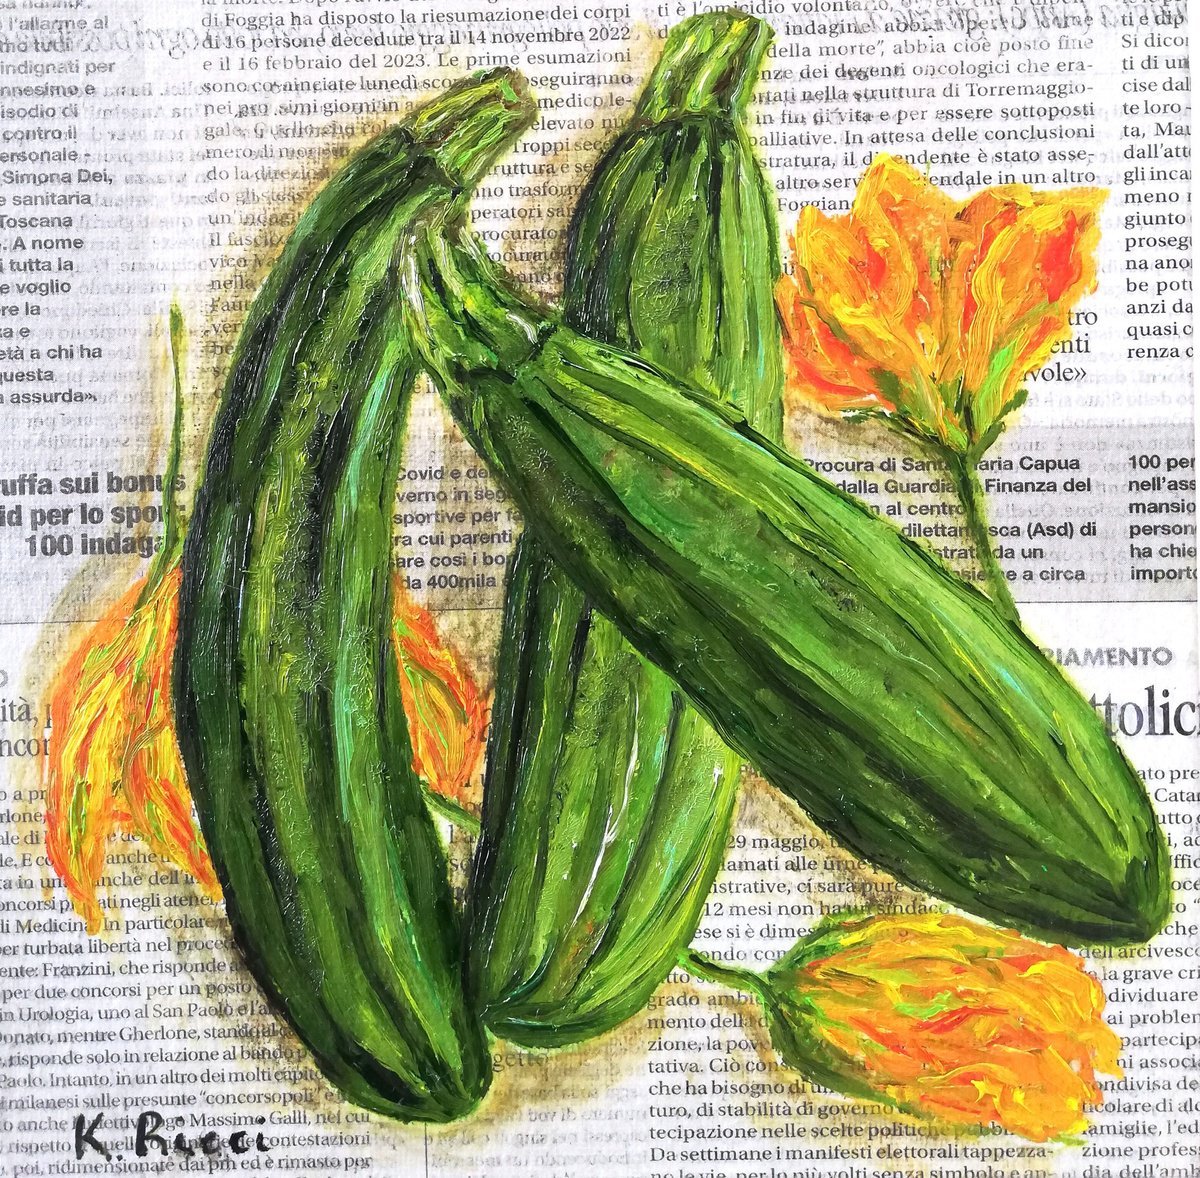 Zucchini Flowers on Newspaper Original Oil on Canvas Board Painting 8 by 8 inches (20x20... by Katia Ricci